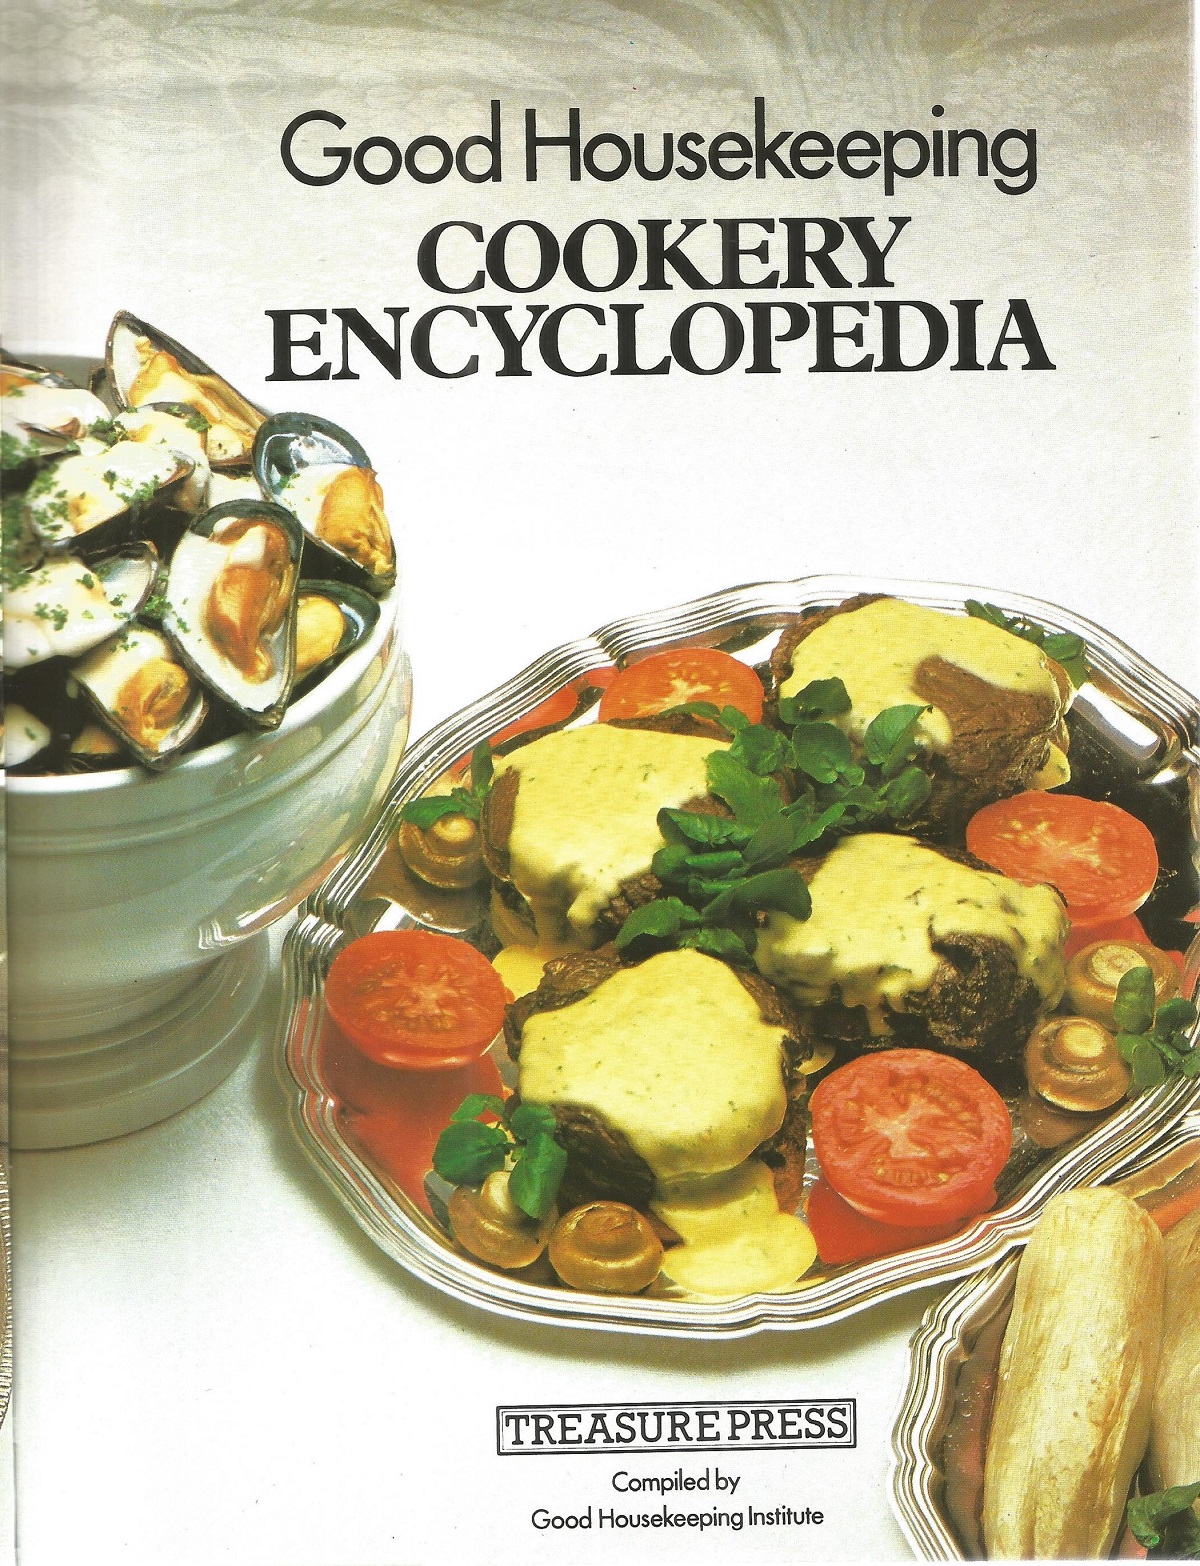 Good Housekeeping Cookery Encyclopaedia Hardback Book 1982 Good Condition with some slight signs